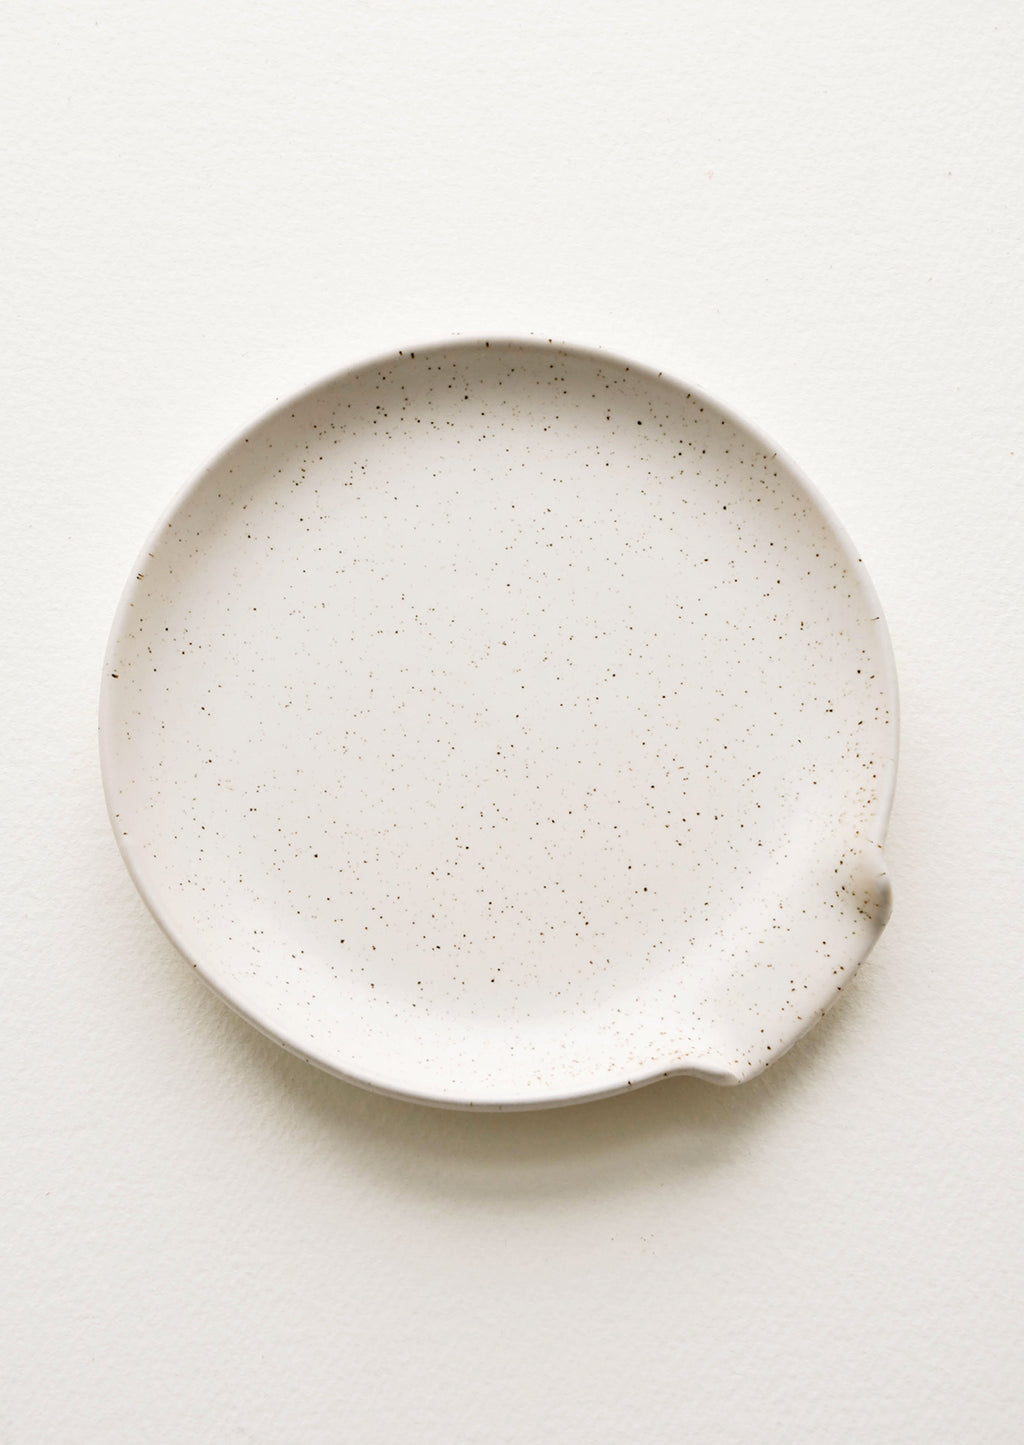 Natural: Circular ceramic spoon rest in ivory with tiny black speckles